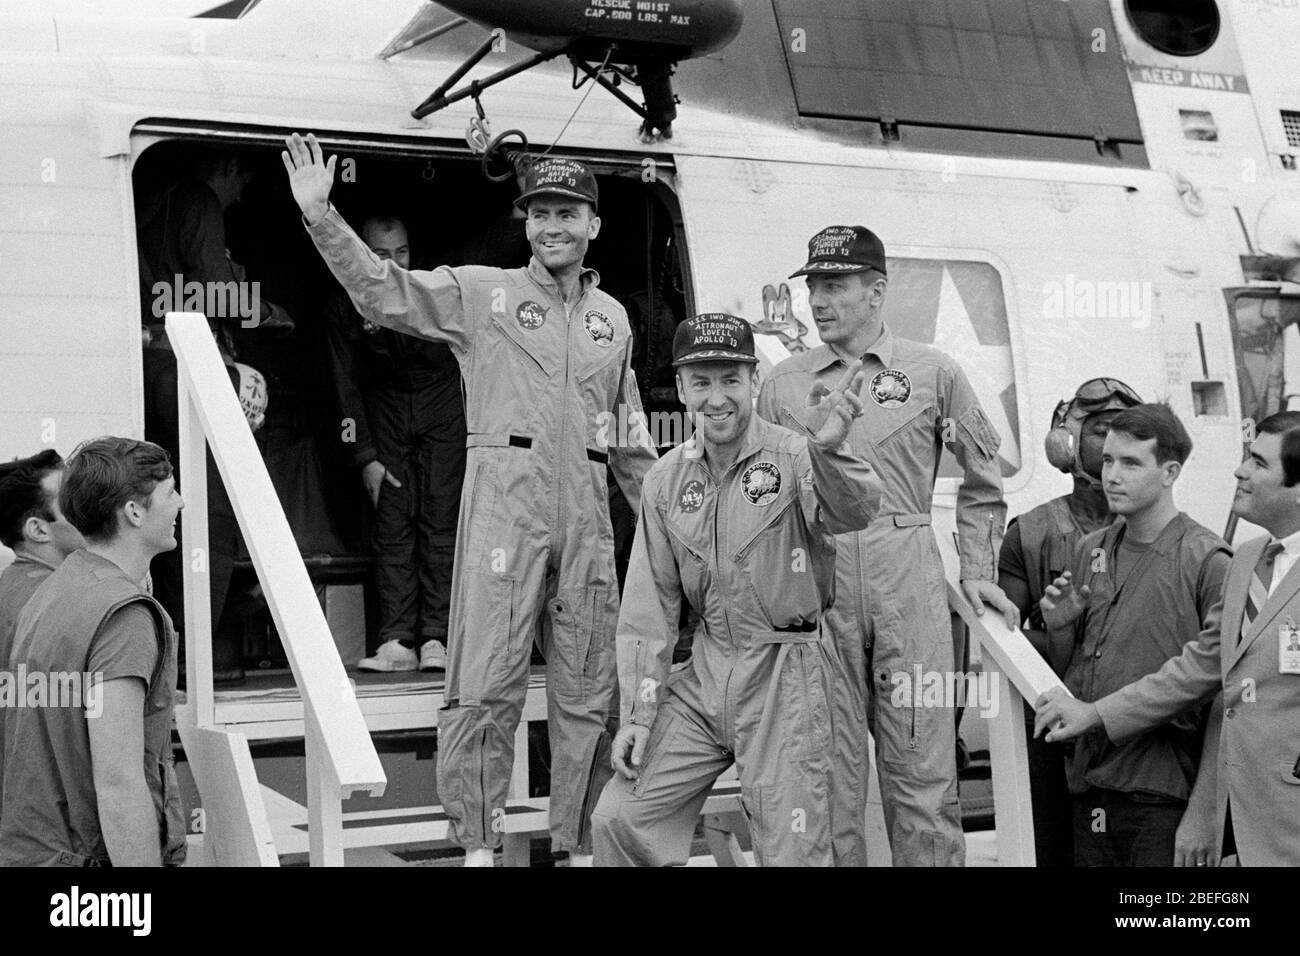 The crew members of Apollo 13, step aboard the USS Iwo Jima, prime recovery ship for the mission, following splashdown and recovery operations in the South Pacific Ocean. Exiting the helicopter, which made the pick-up some four miles from the Iwo Jima are (from left) astronauts Fred W. Haise Jr., lunar module pilot; James A. Lovell Jr., commander; and John L. Swigert Jr., command module pilot. Apollo 13, launched on April 11, 1970, was NASA's third crewed mission to the moon. Two days later, on April 13, while en route to the lunar surface, a fault in the electrical system of one of the Servic Stock Photo